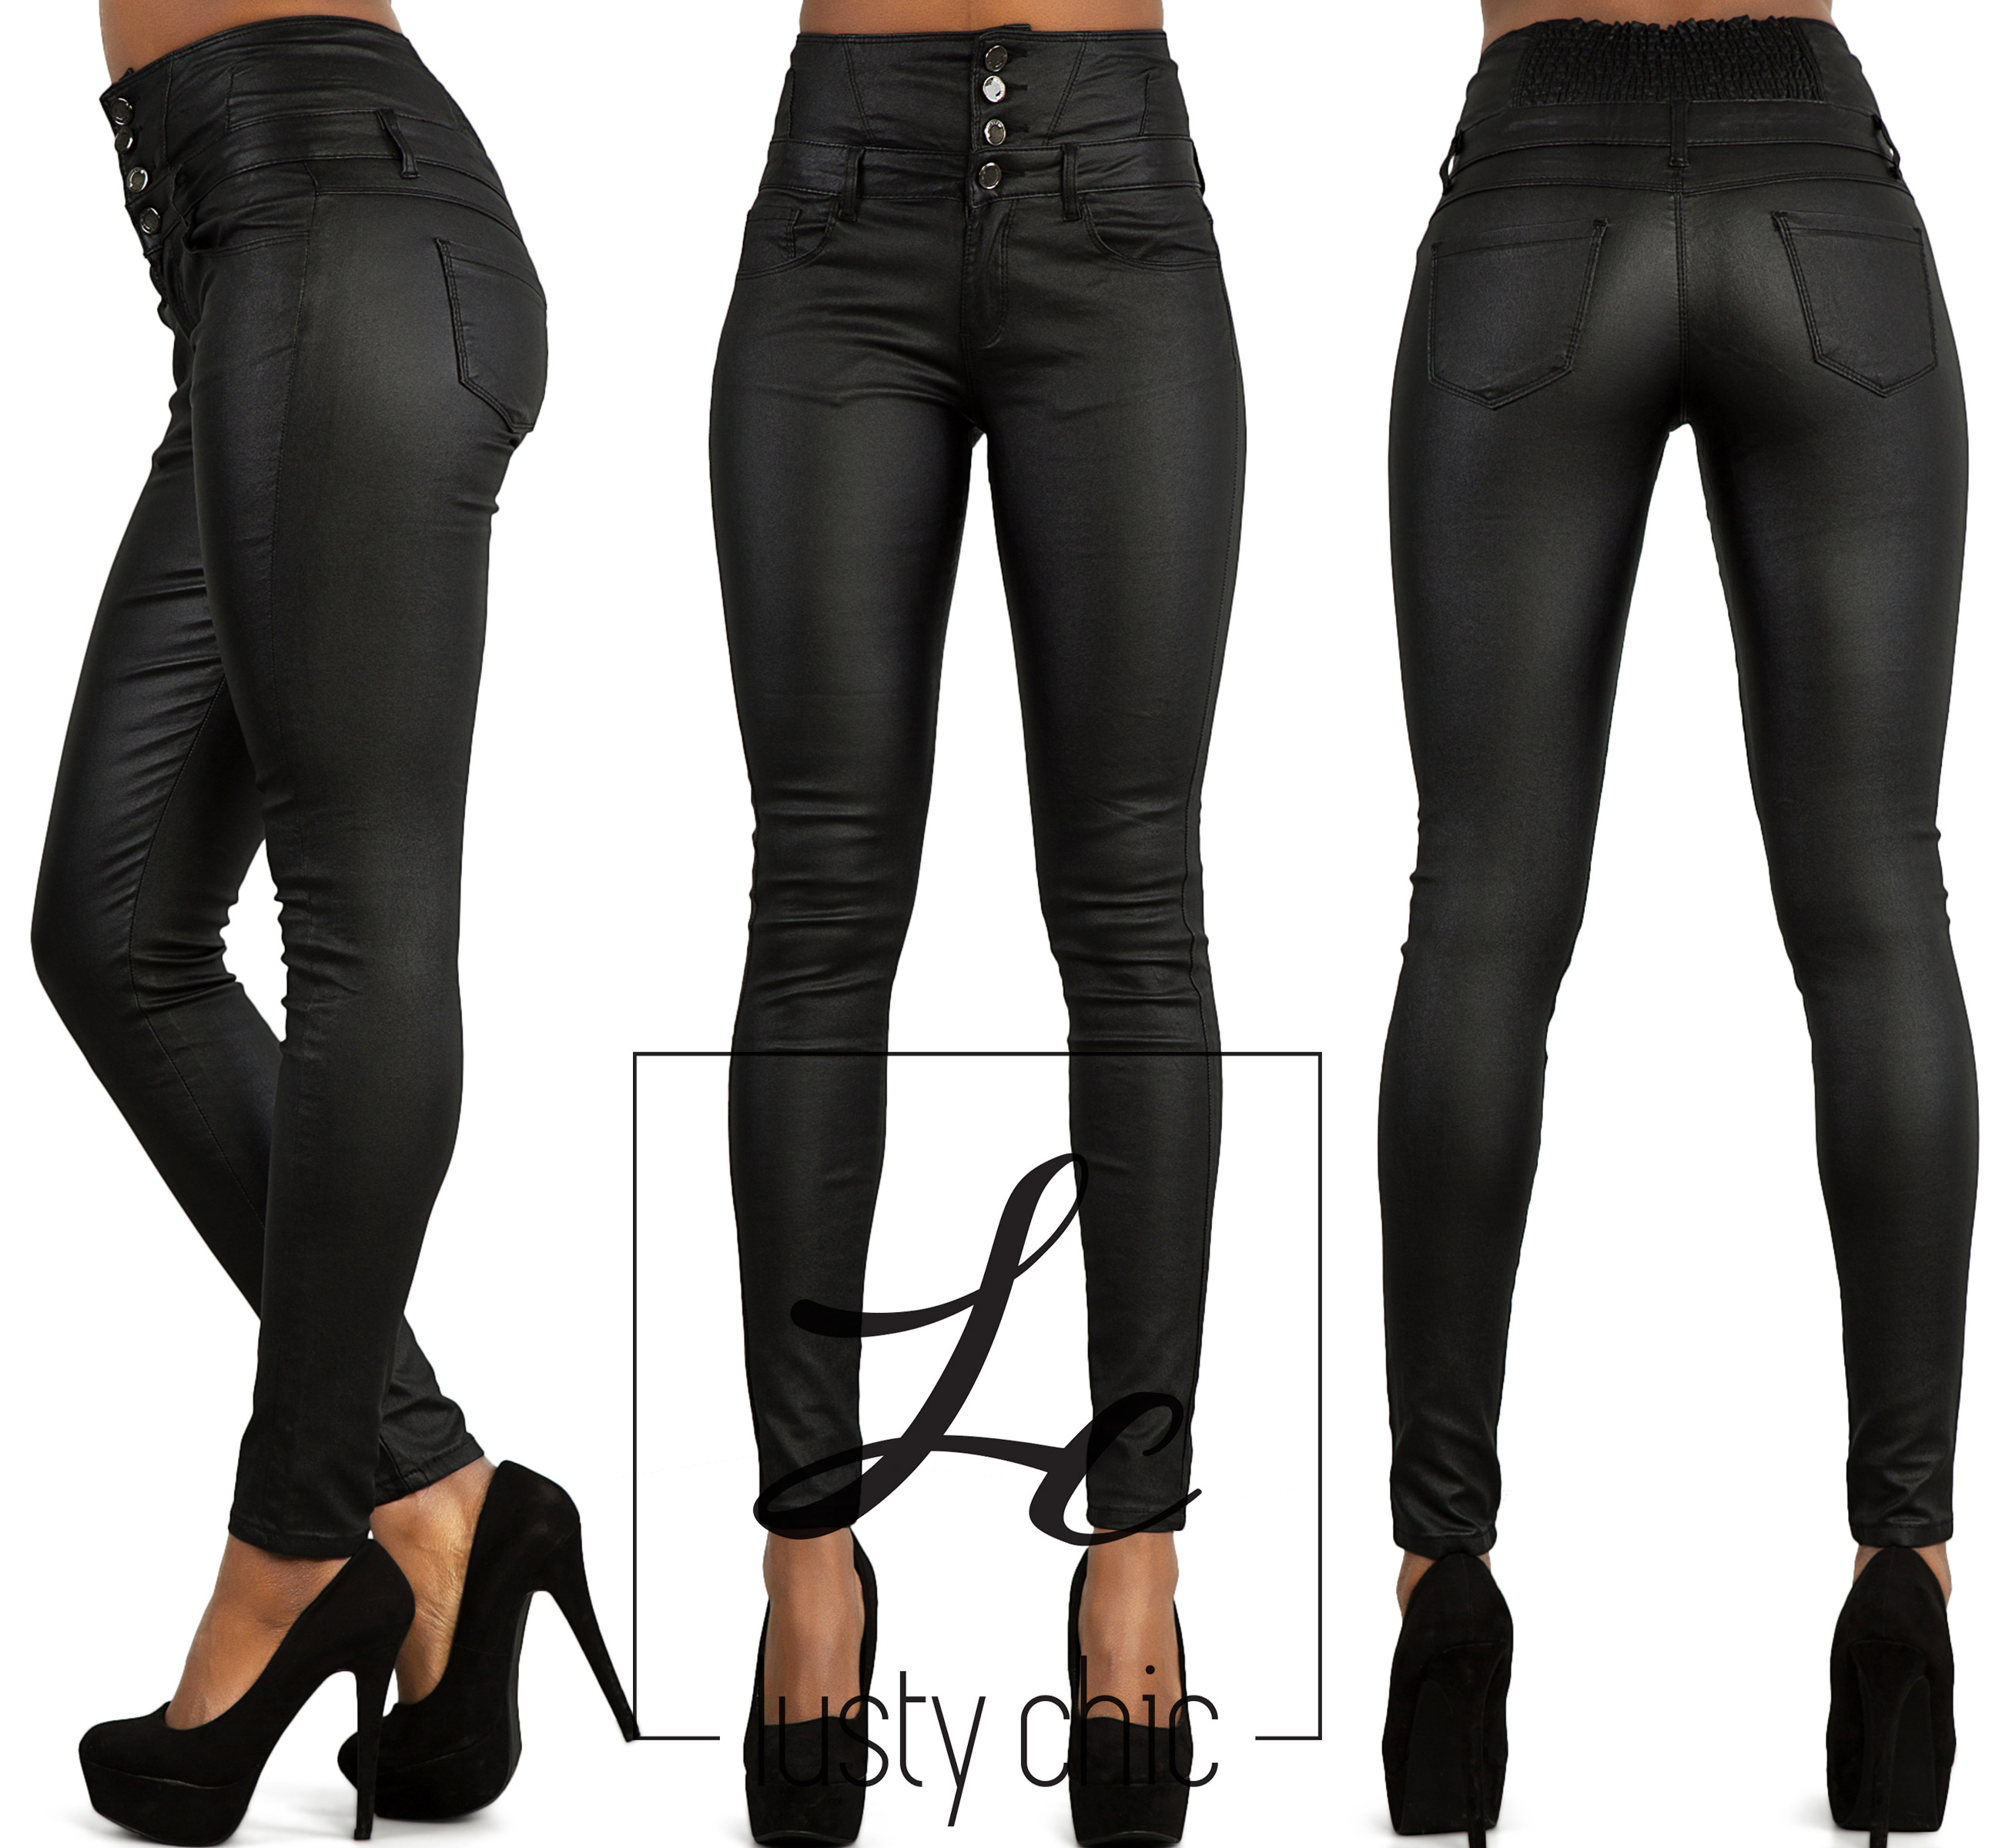 WOMENS HIGH WAISTED BLACK LEATHER LOOK JEANS SLIM FIT TROUSERS SIZE 6 8 ...